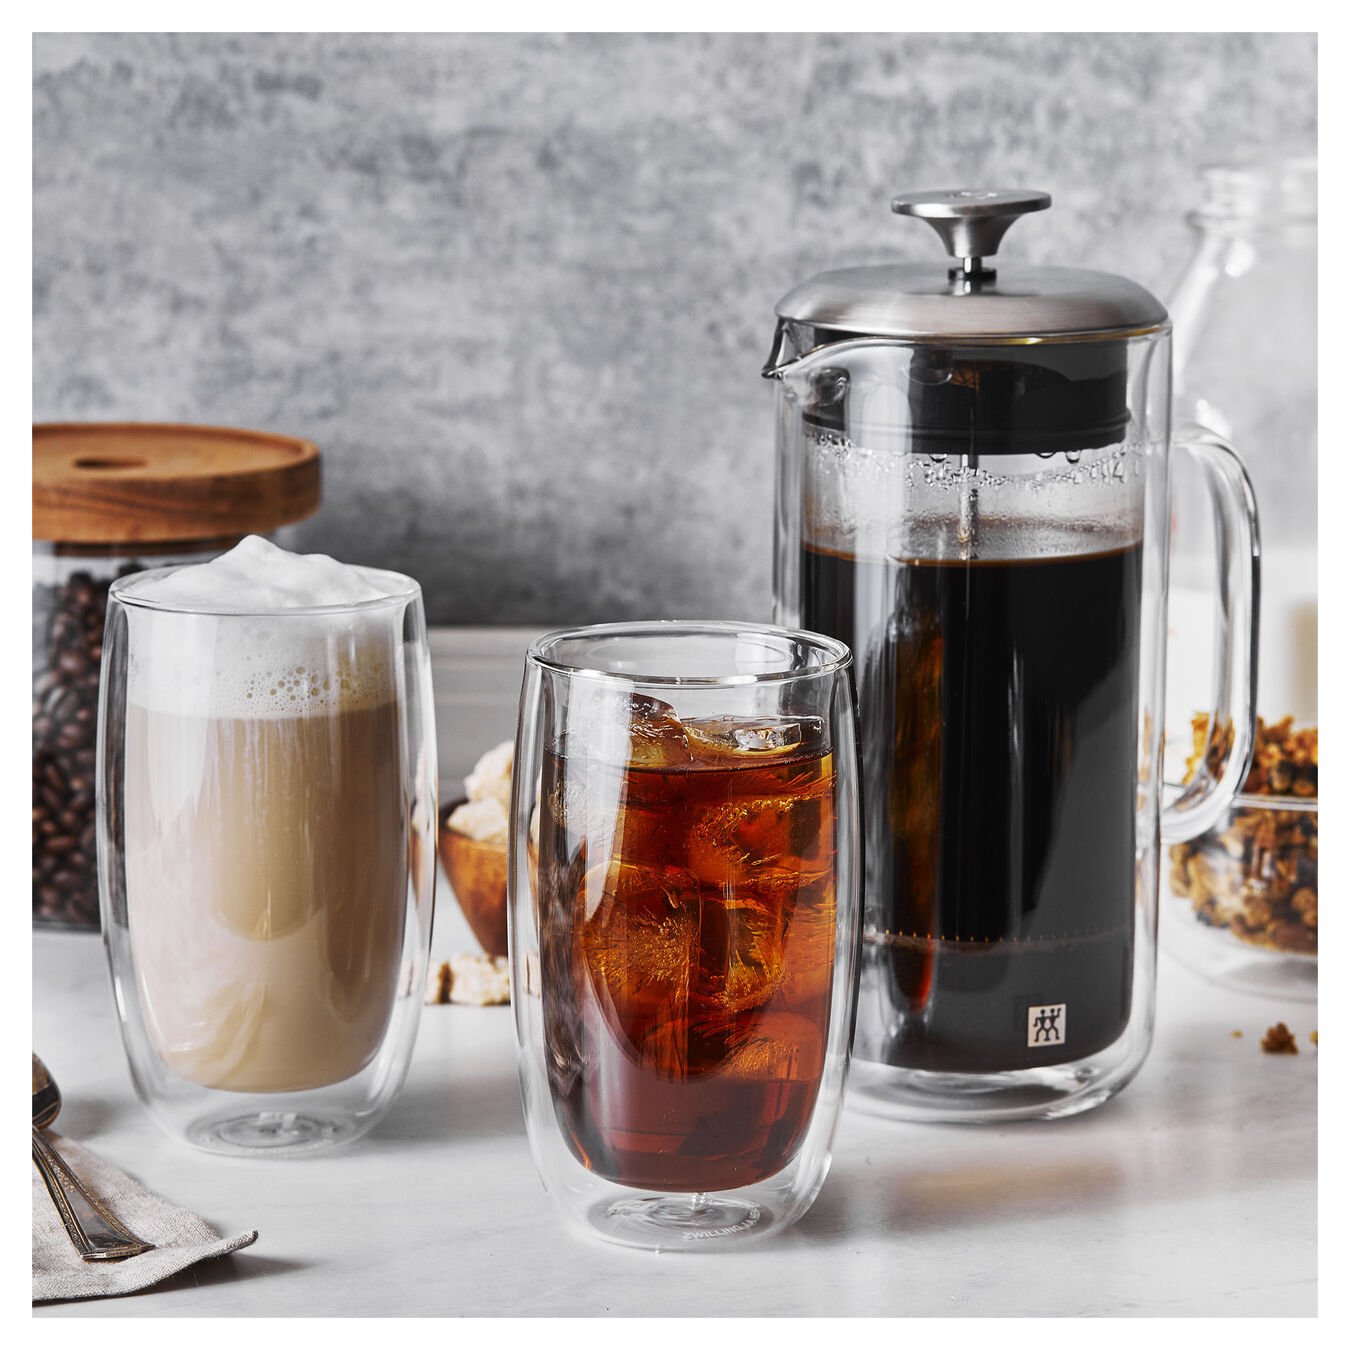 french press full of coffee and two latte glasses, one full of coffee with cream, one with an iced drink sit on white counter top with canister of coffee beans in background